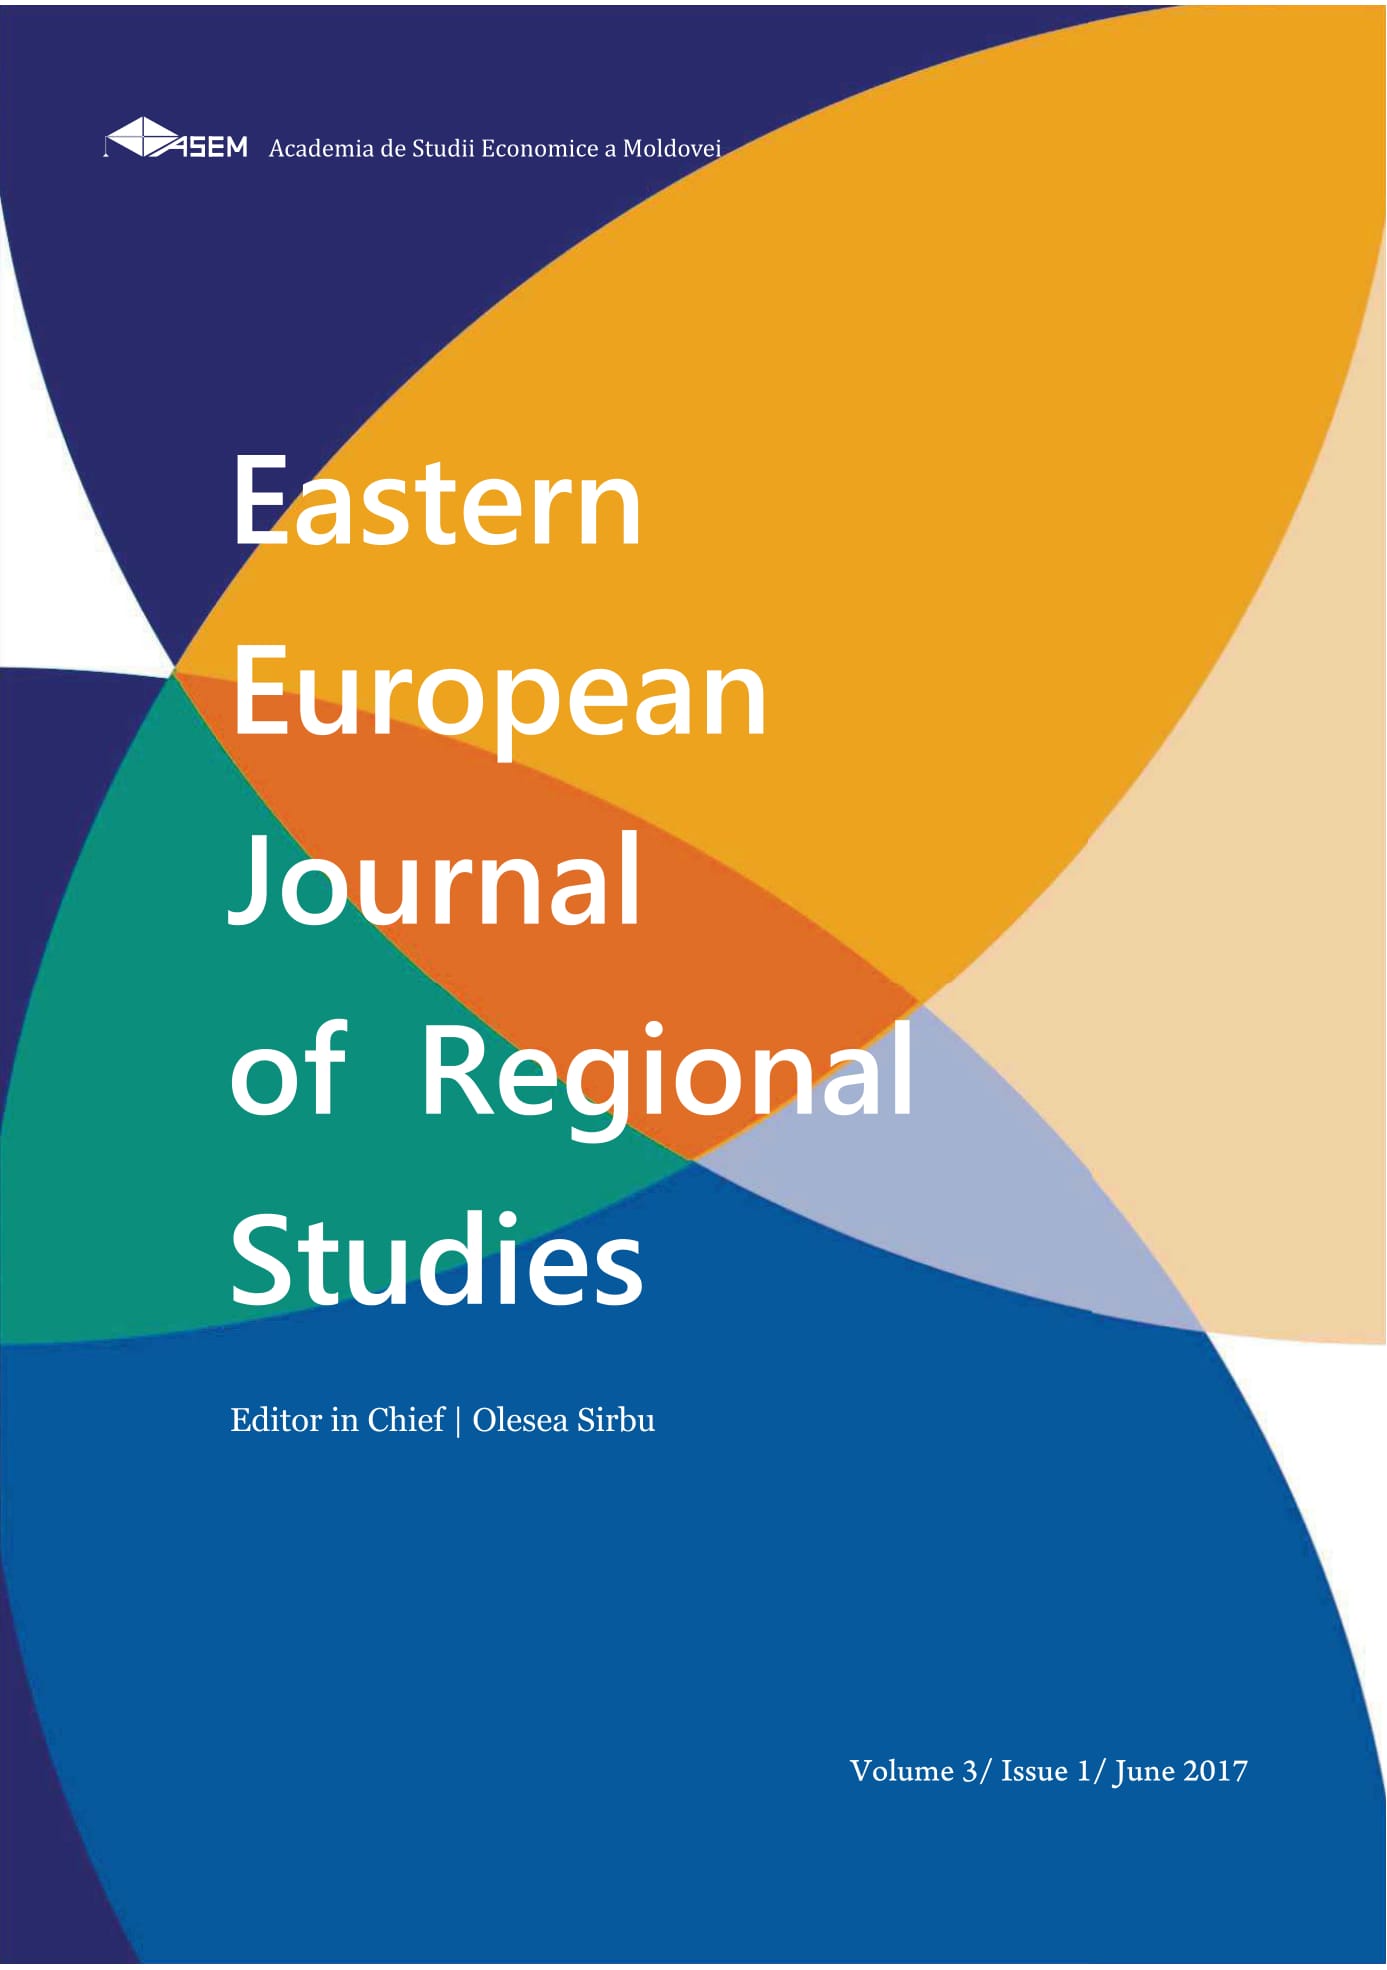 The socio-demographic changes in Romania: An analysis from the human development perspective